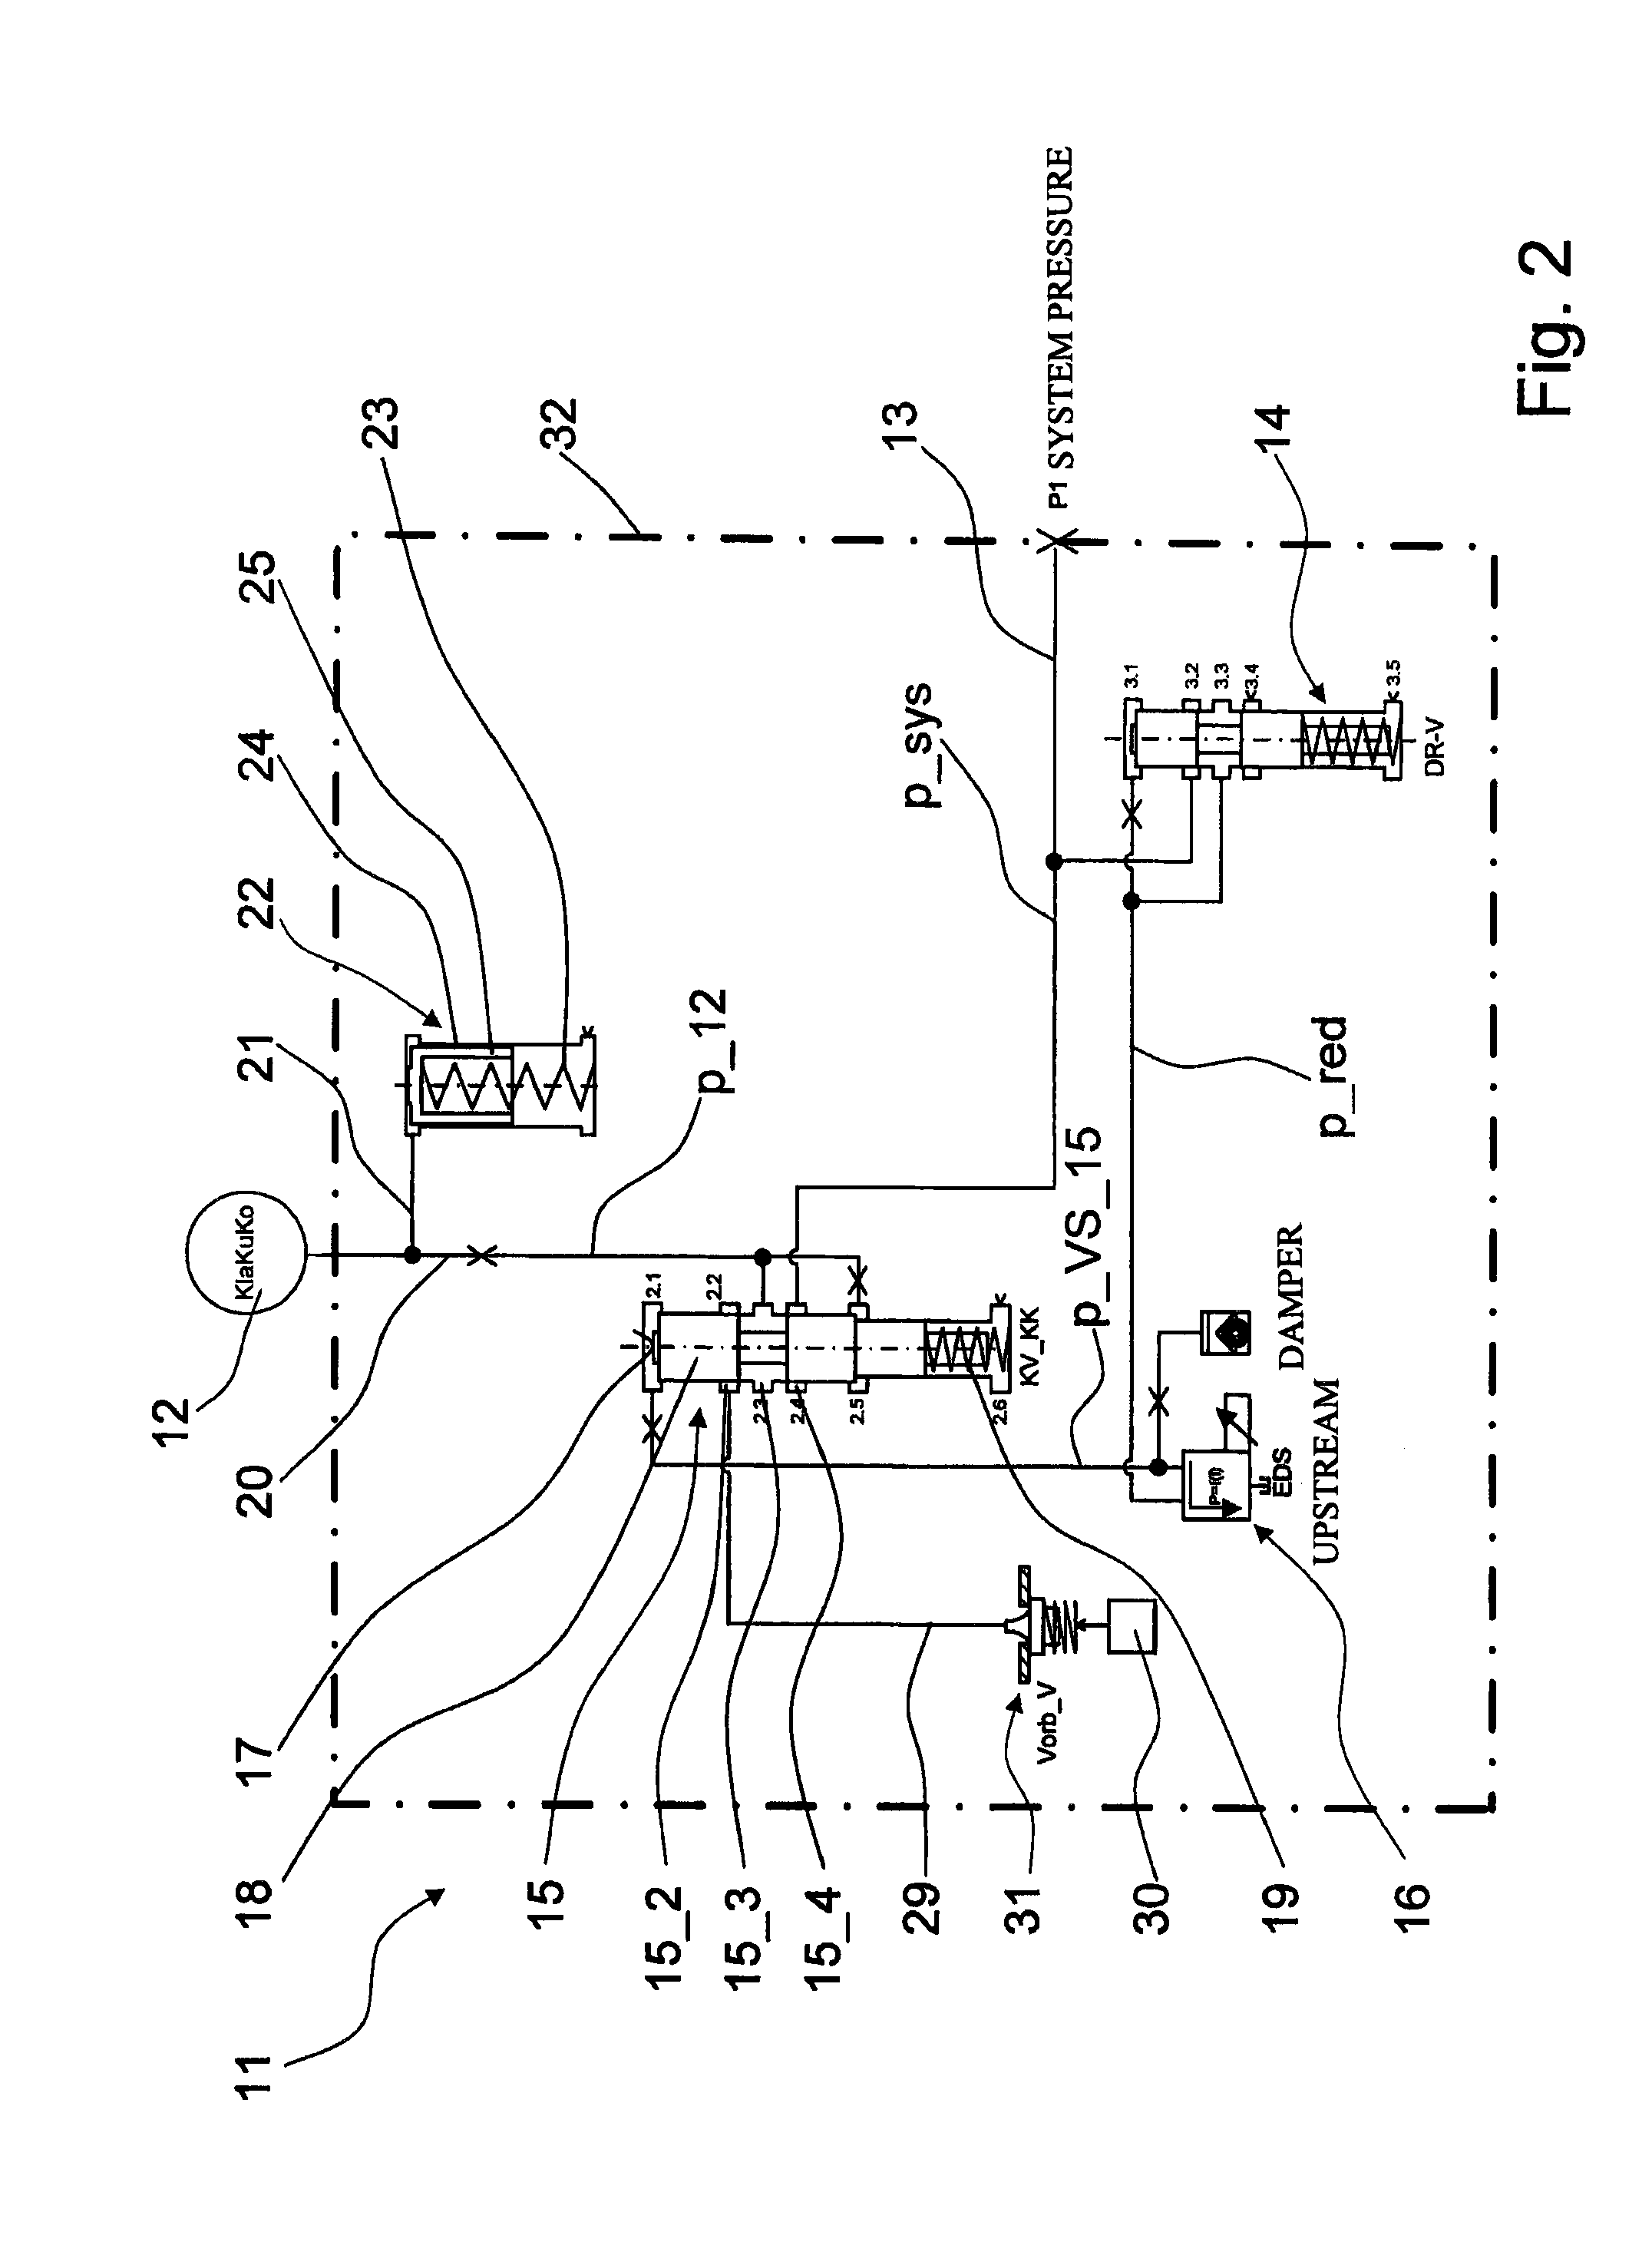 Transmission apparatus comprising at least one positive shifting element  hydraulically actuated by way of a hydraulic system